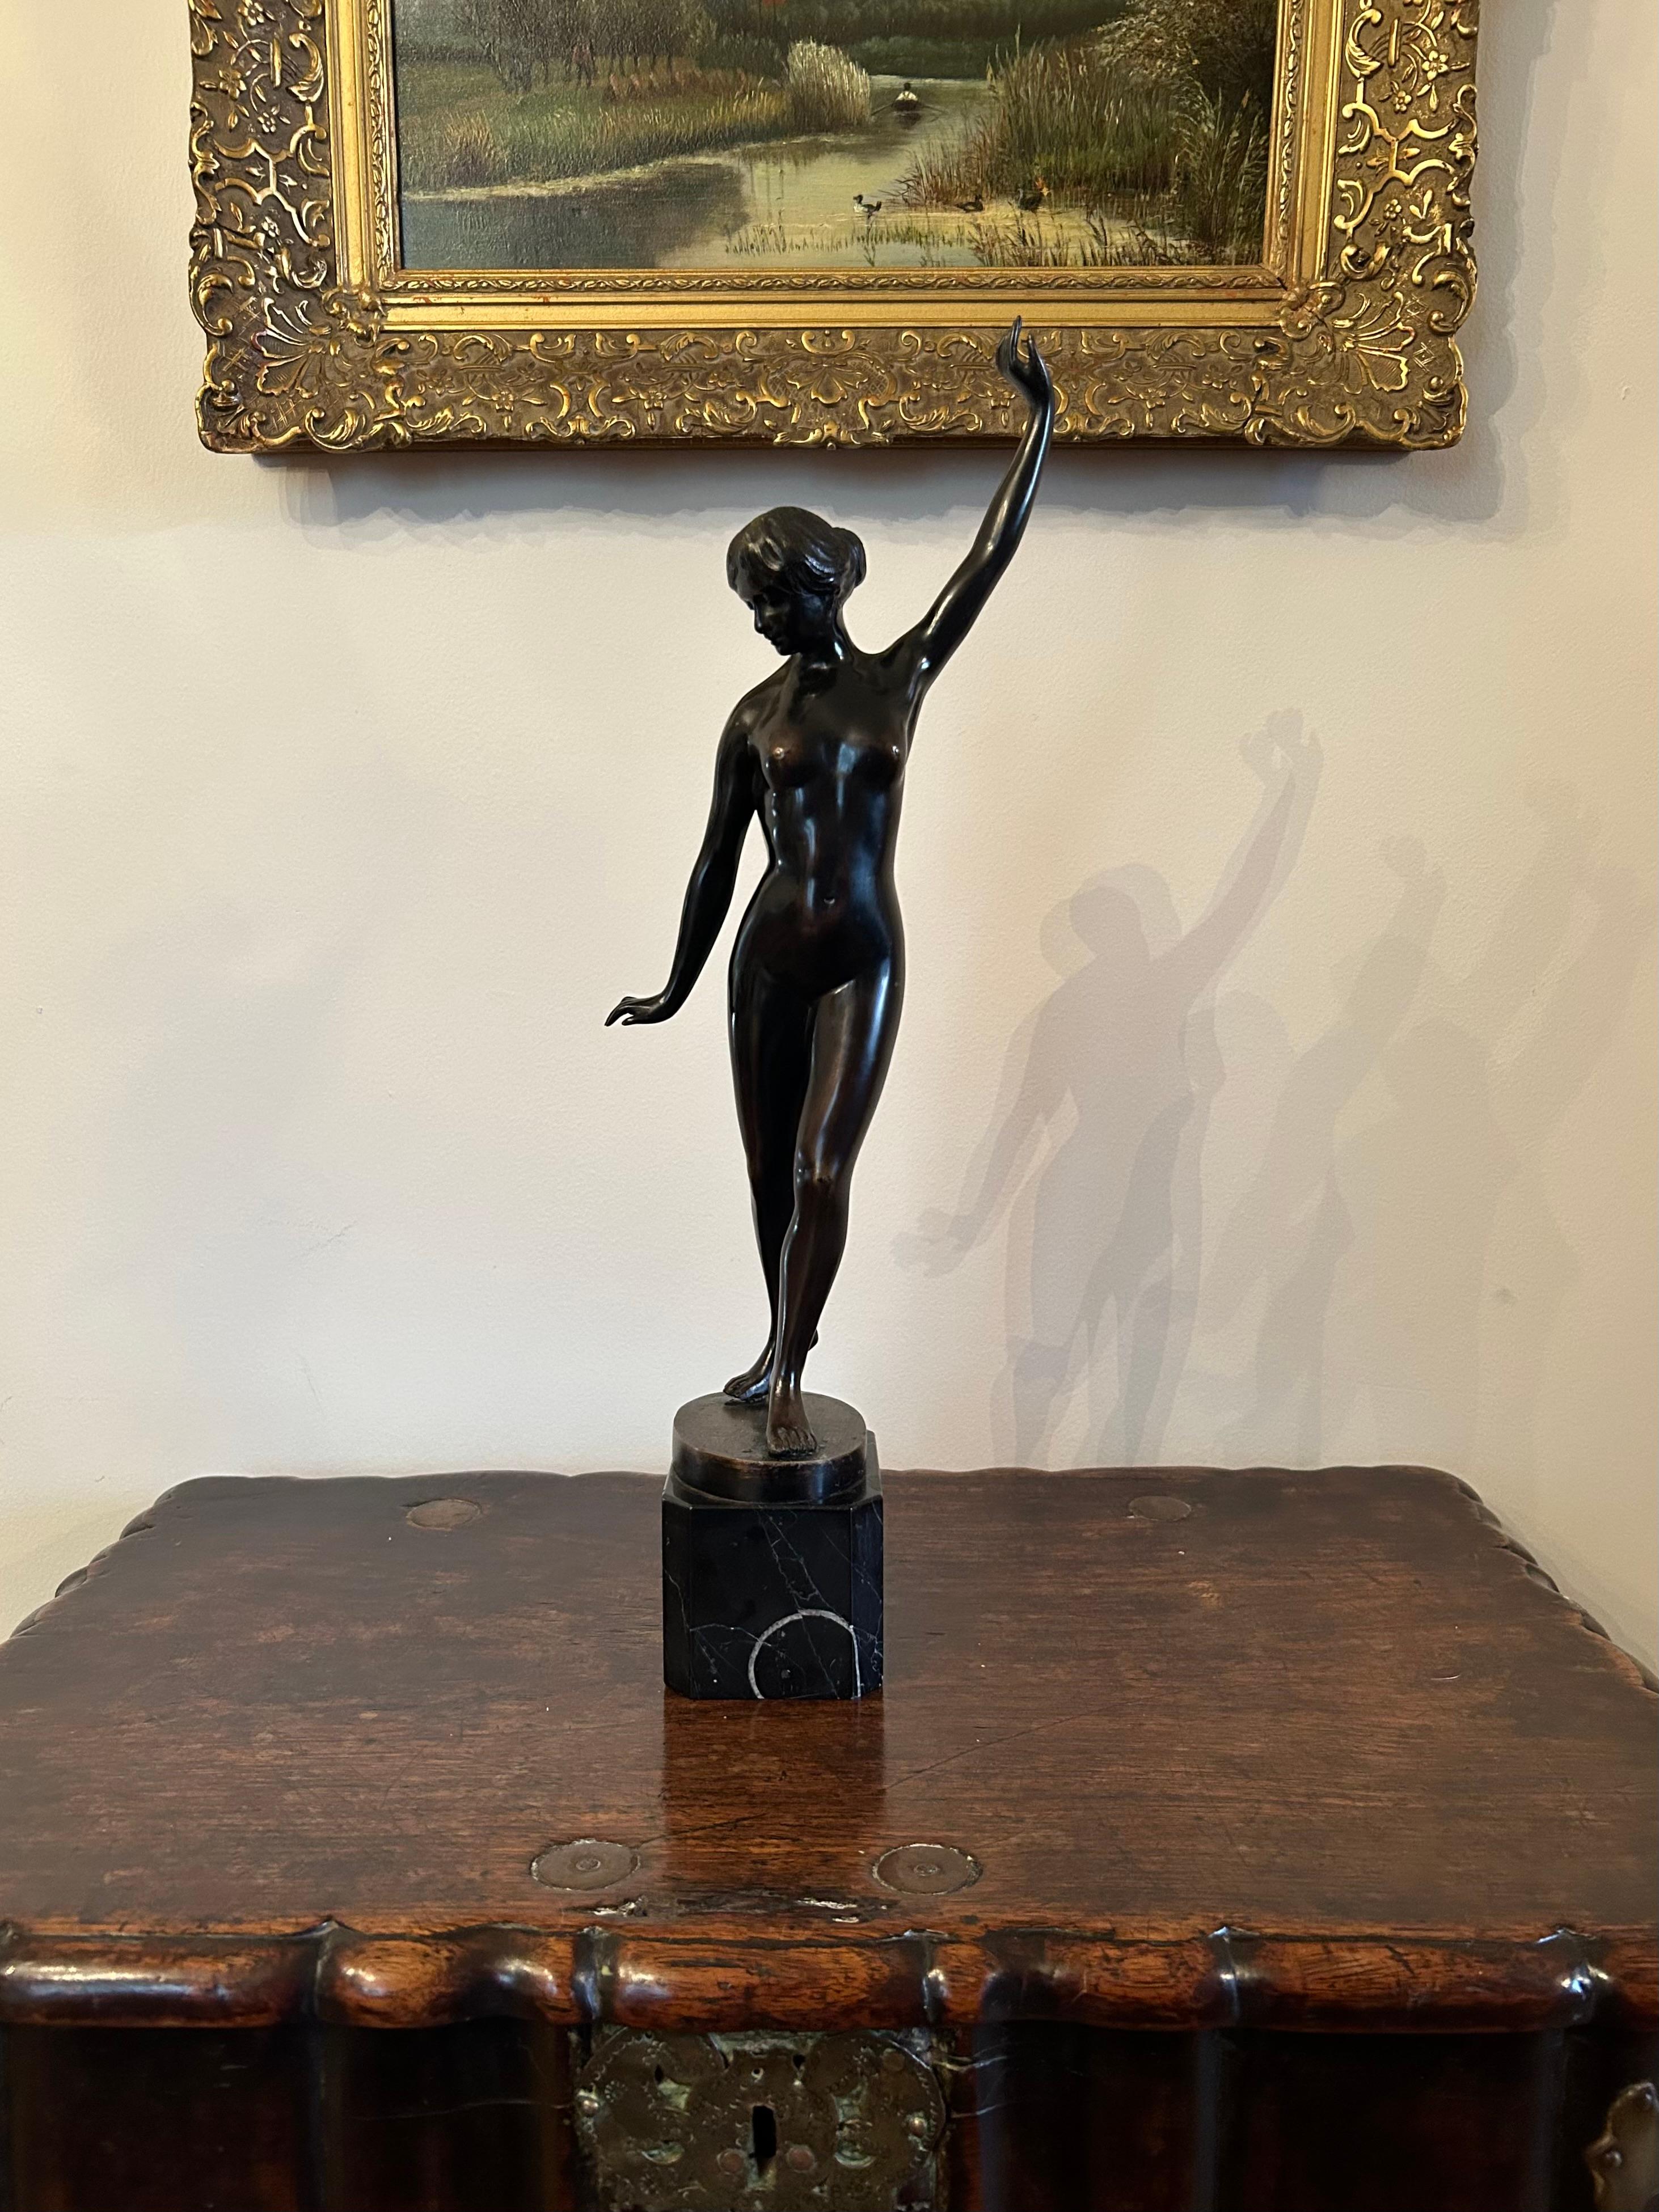 A beautiful continental bronze figure of a standing female on a black marble base. Early 20th century, signed illegibly on the base.
This elegant bronze has a wonderful patina and movement, as if the figure is about to step out into the world. 
Tiny